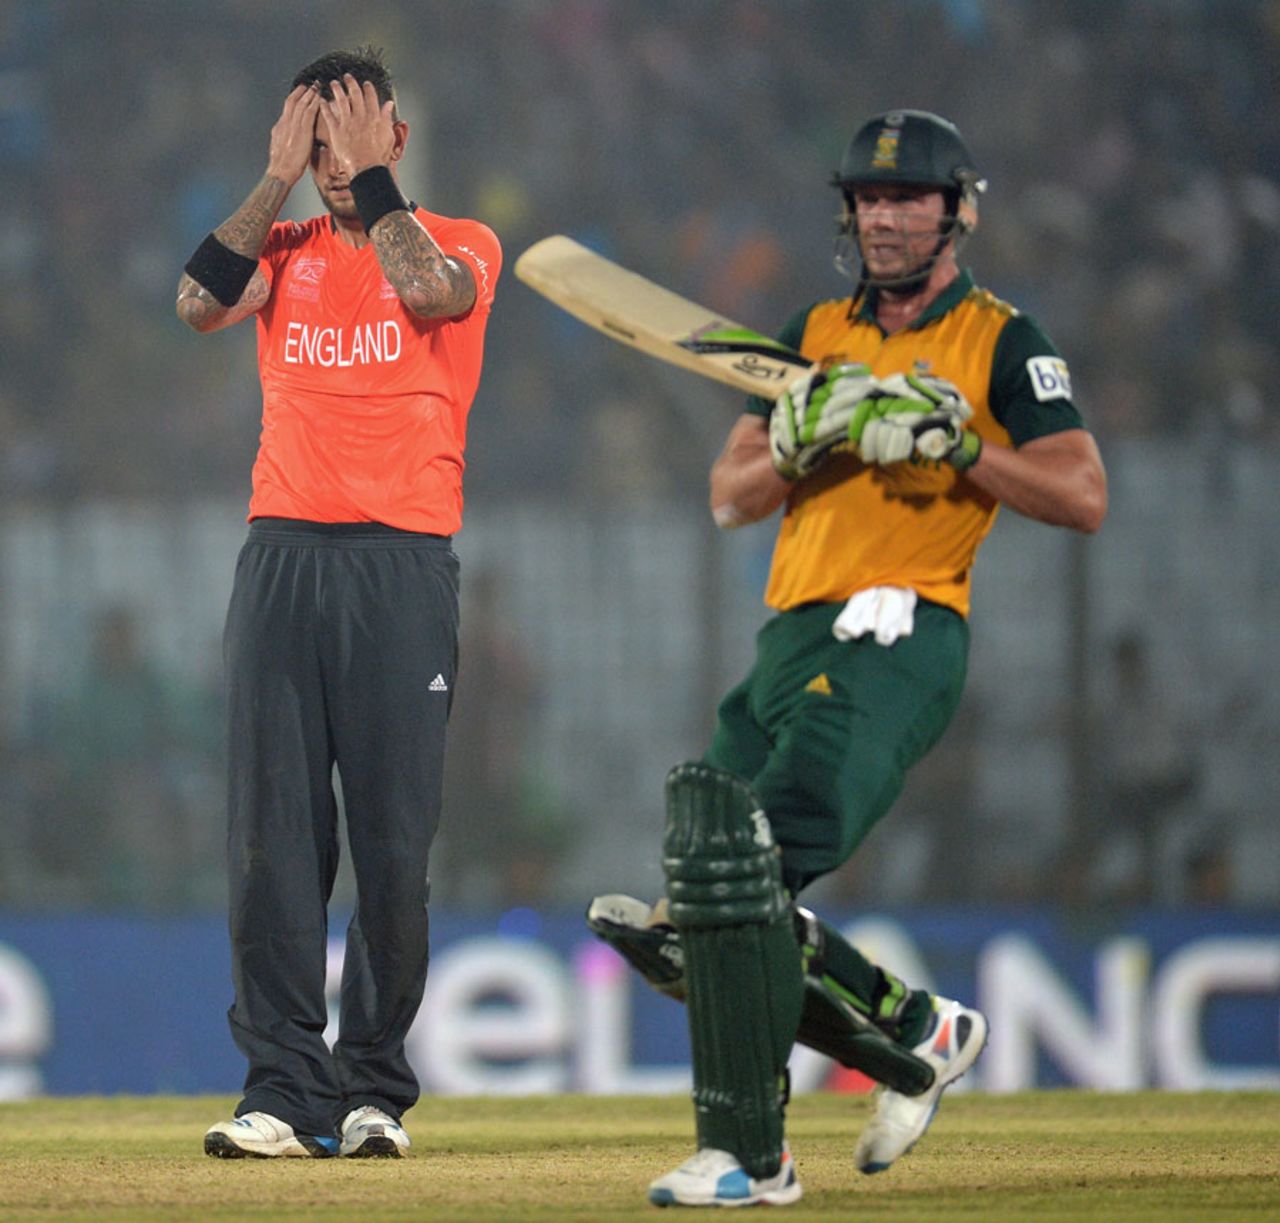 Jade Dernbach reacts after being hit for a boundary, England v South Africa, World Twenty20 2014, Group 1, Chittagong, March 29, 2014